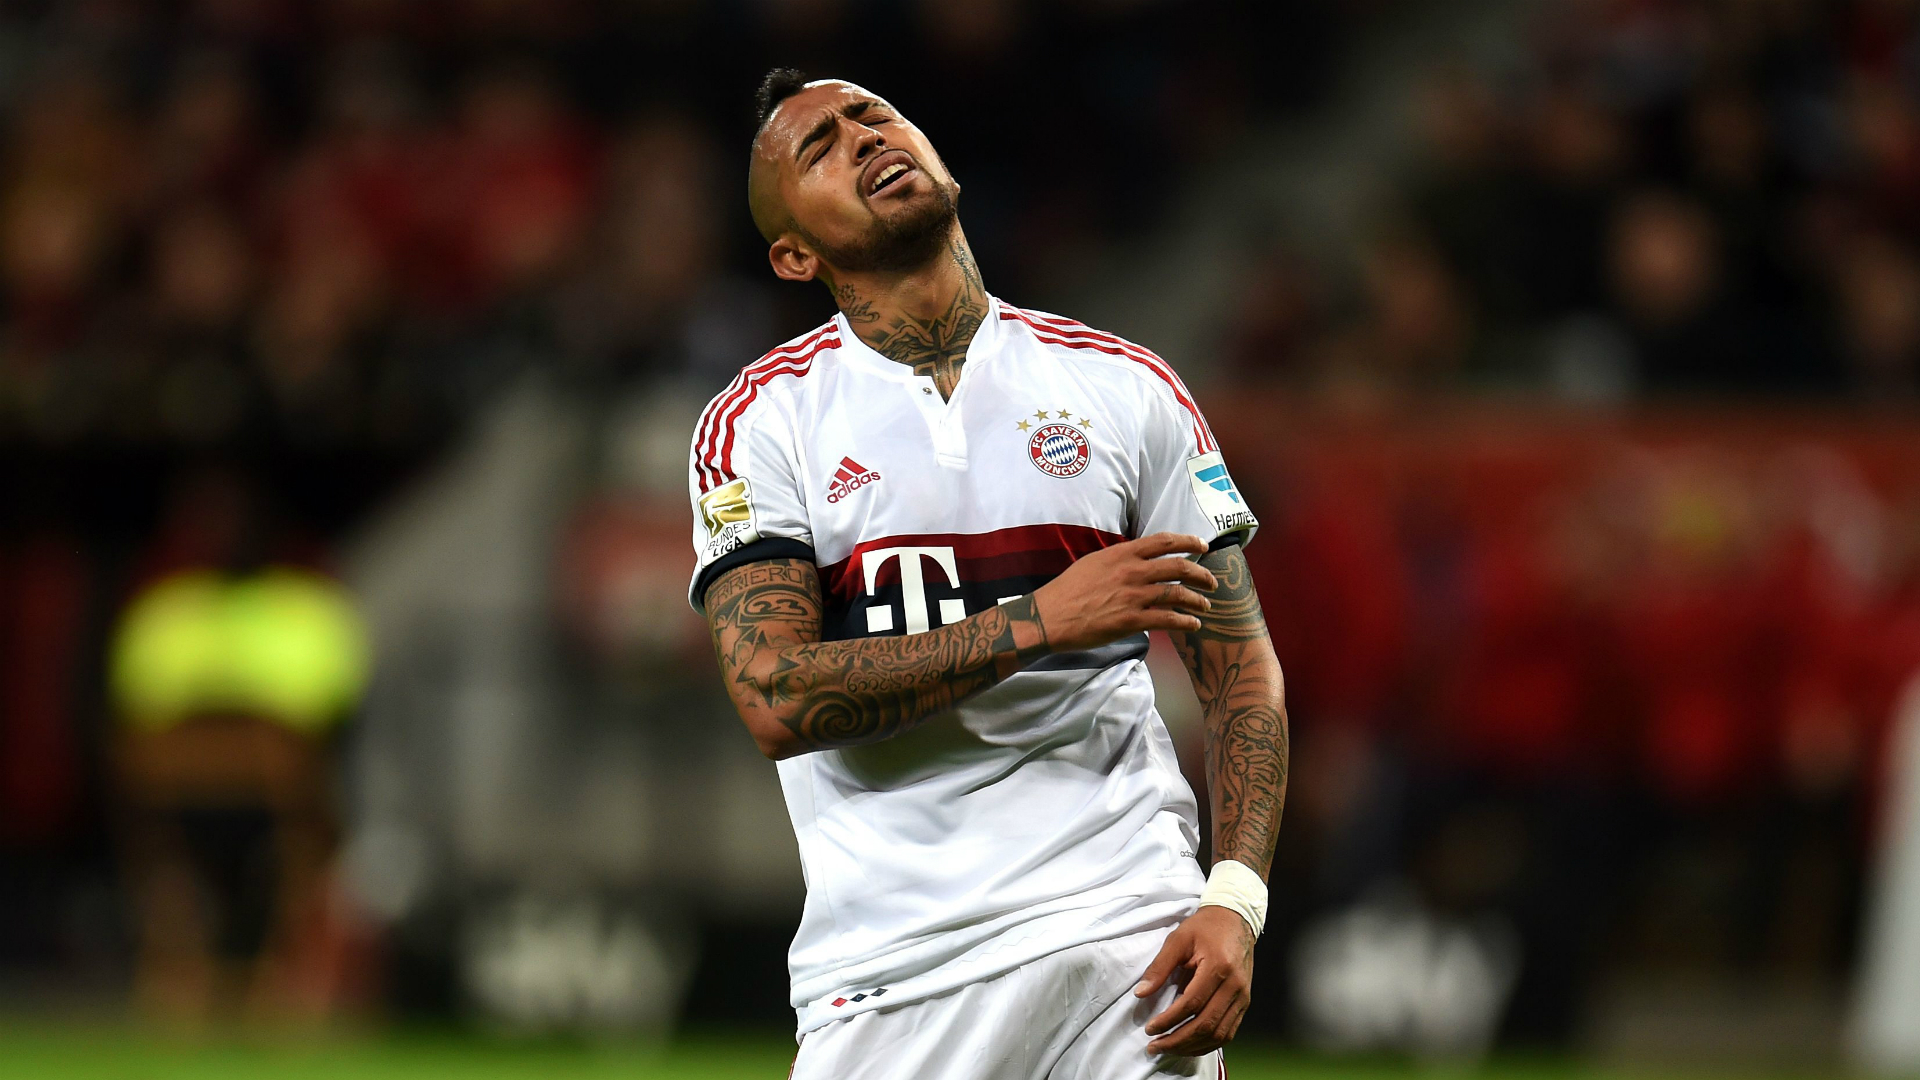 Vidal Reveals Rejected League For Bayern Munich | beIN SPORTS